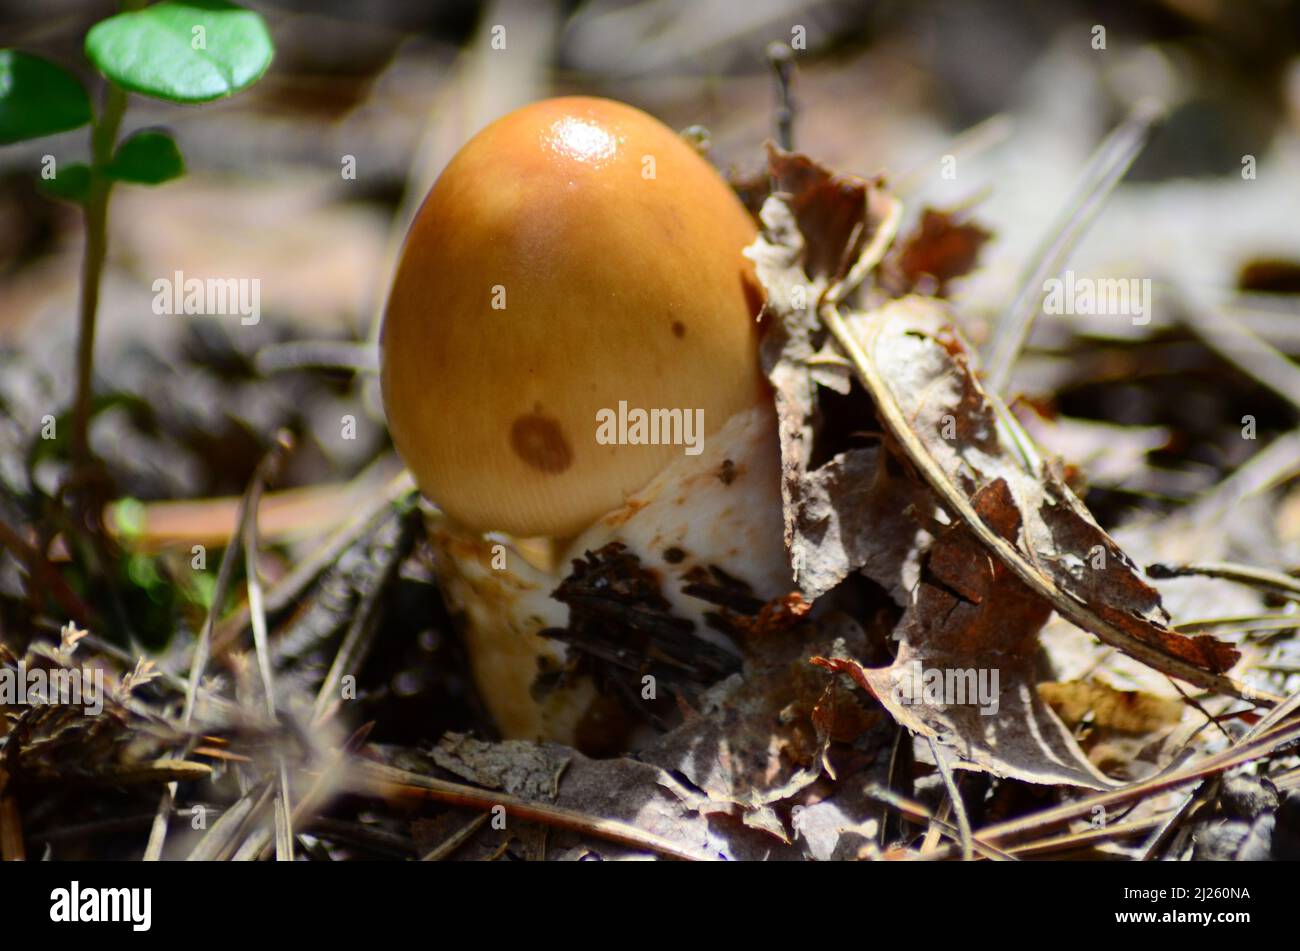 mushrooms on with latin name agaricus silvaticus in a forest glade Stock Photo